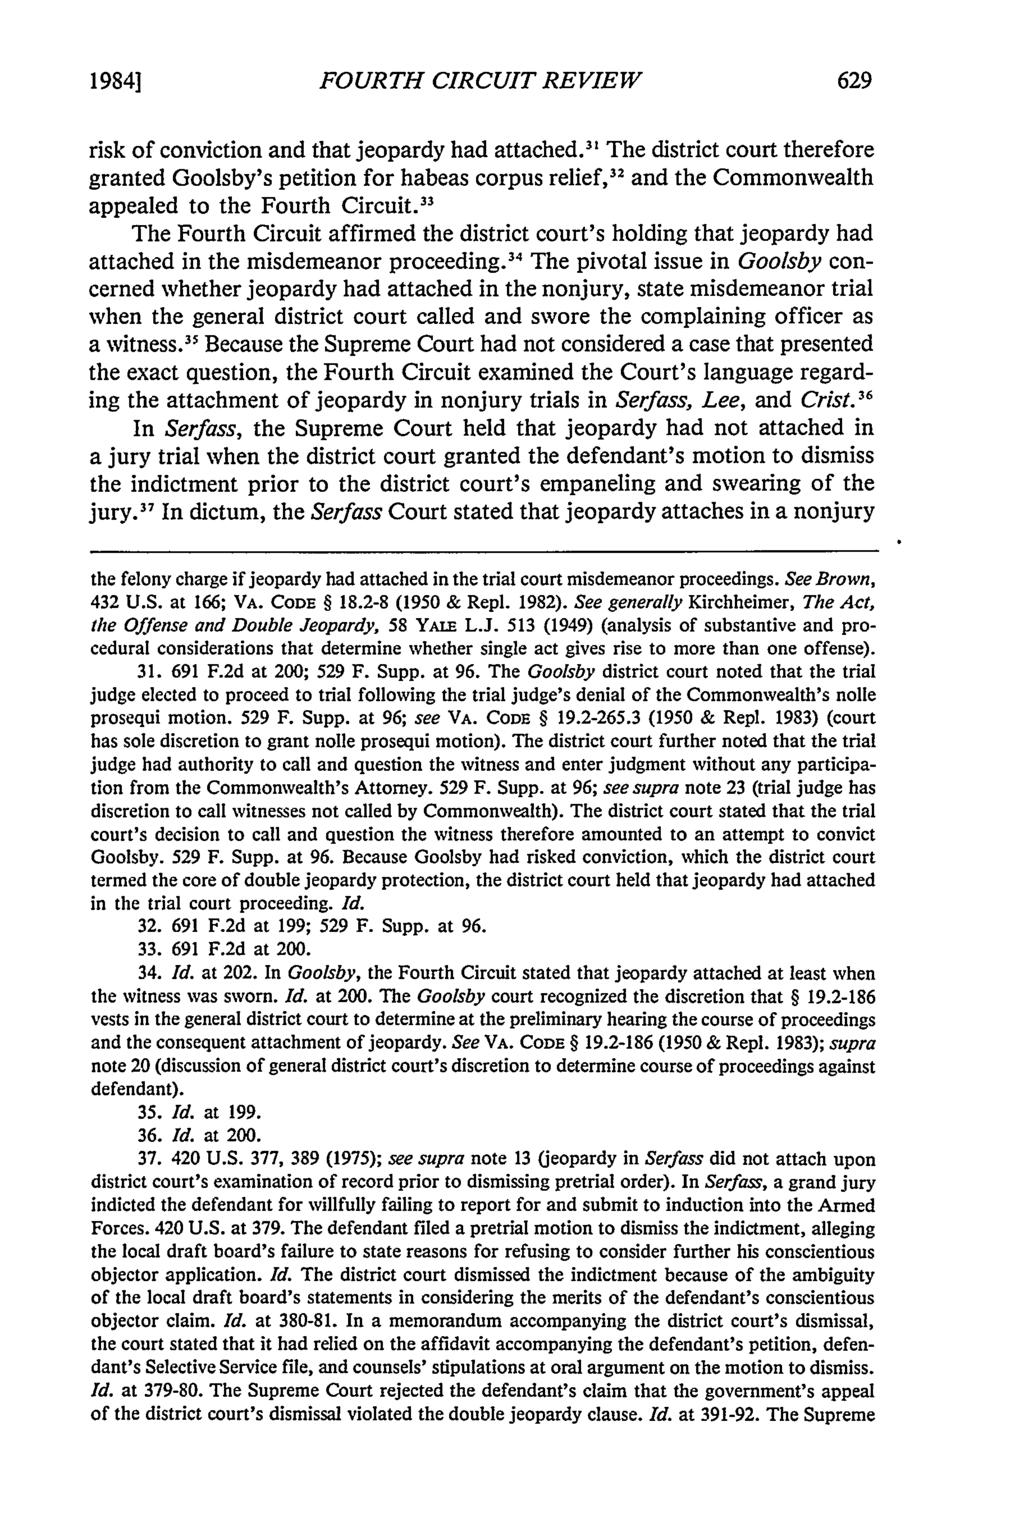 19841 FOURTH CIRCUIT REVIEW risk of conviction and that jeopardy had attached.